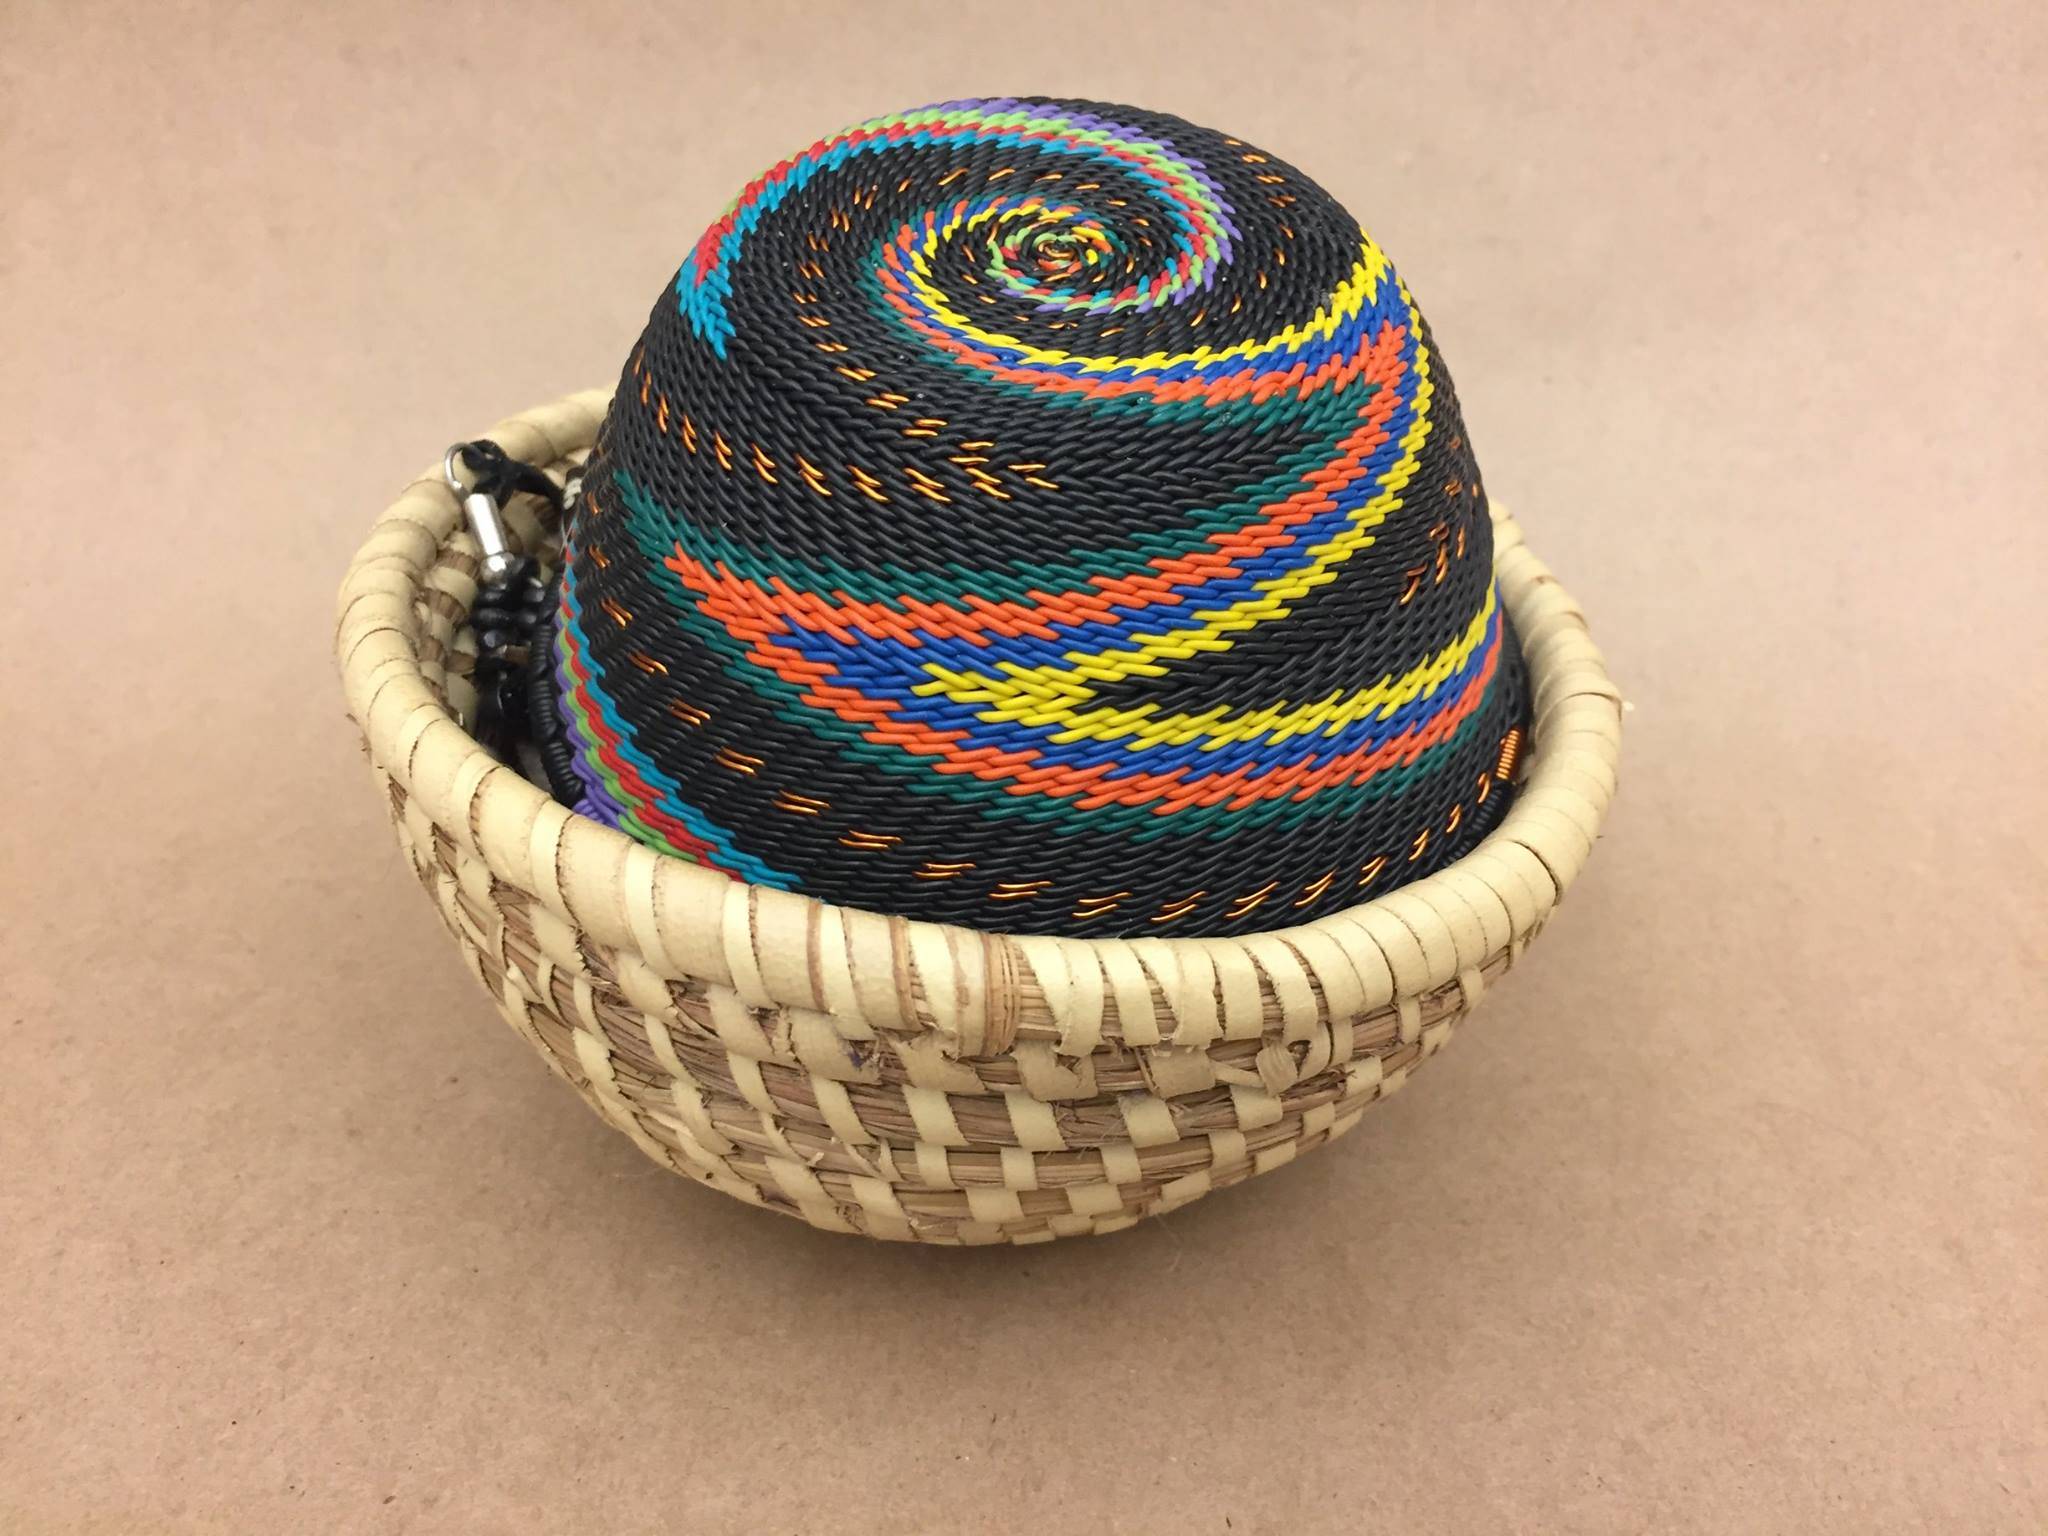 Two woven baskets were part of the property recovered from an impounded vehicle by the Juneau Police Department